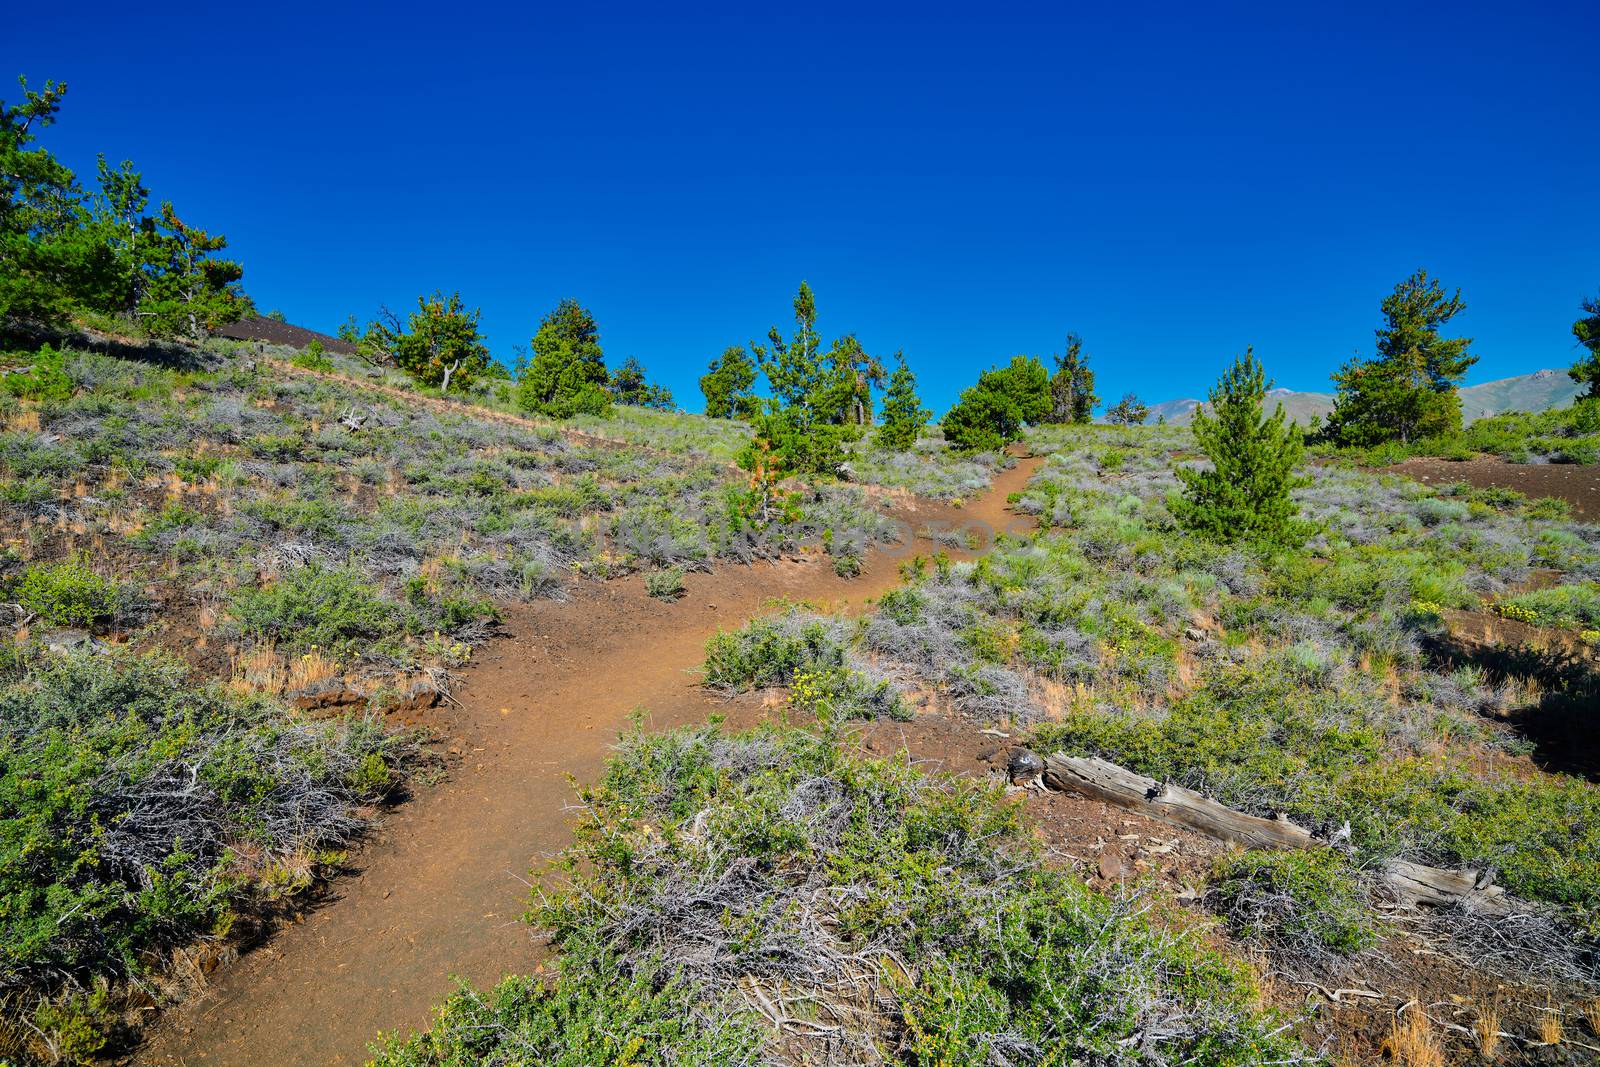 Hiking trail at Craters of the Moon National Park. by patrickstock